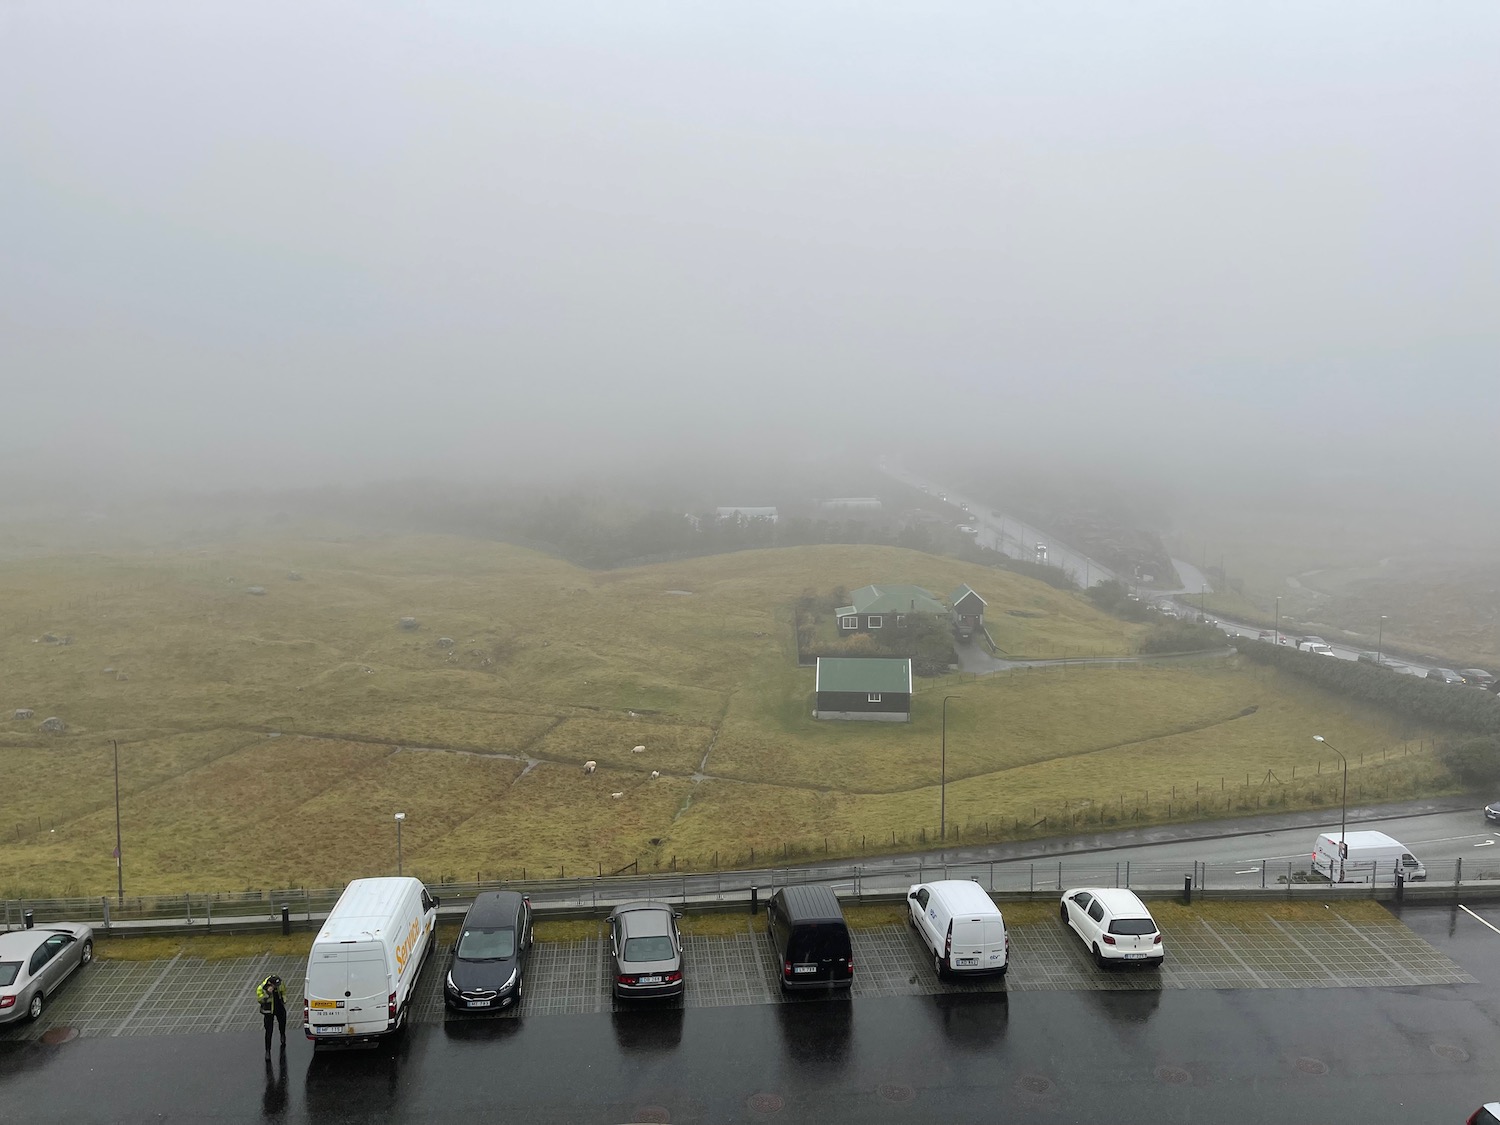 a parking lot with cars and a foggy landscape